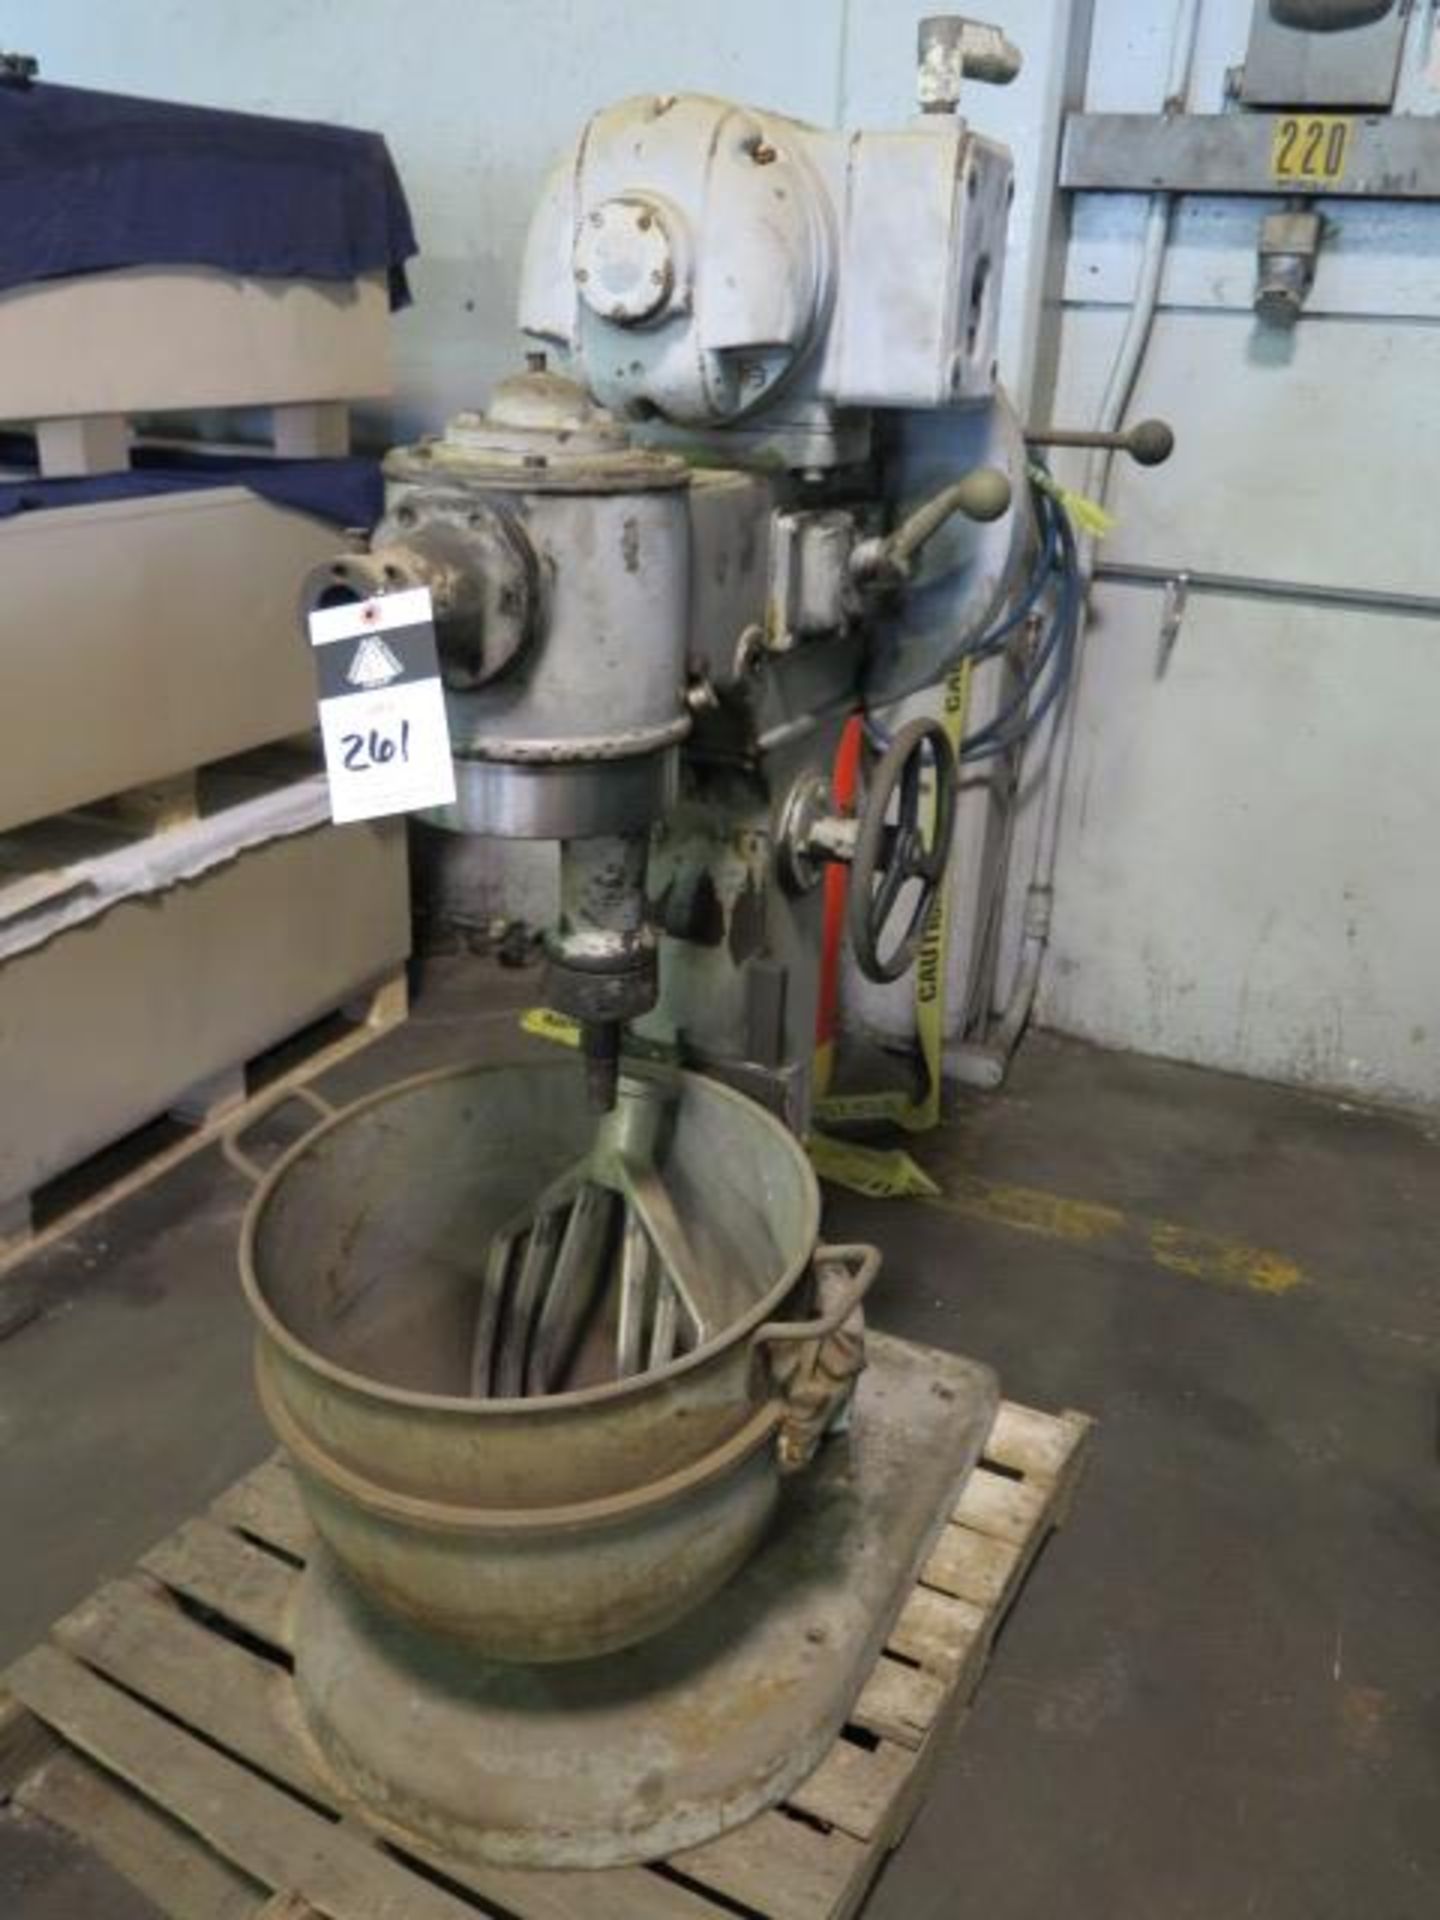 Hobart mdl. S-601 Industrial Mixer s/n 1001511 (SOLD AS-IS - NO WARRANTY)